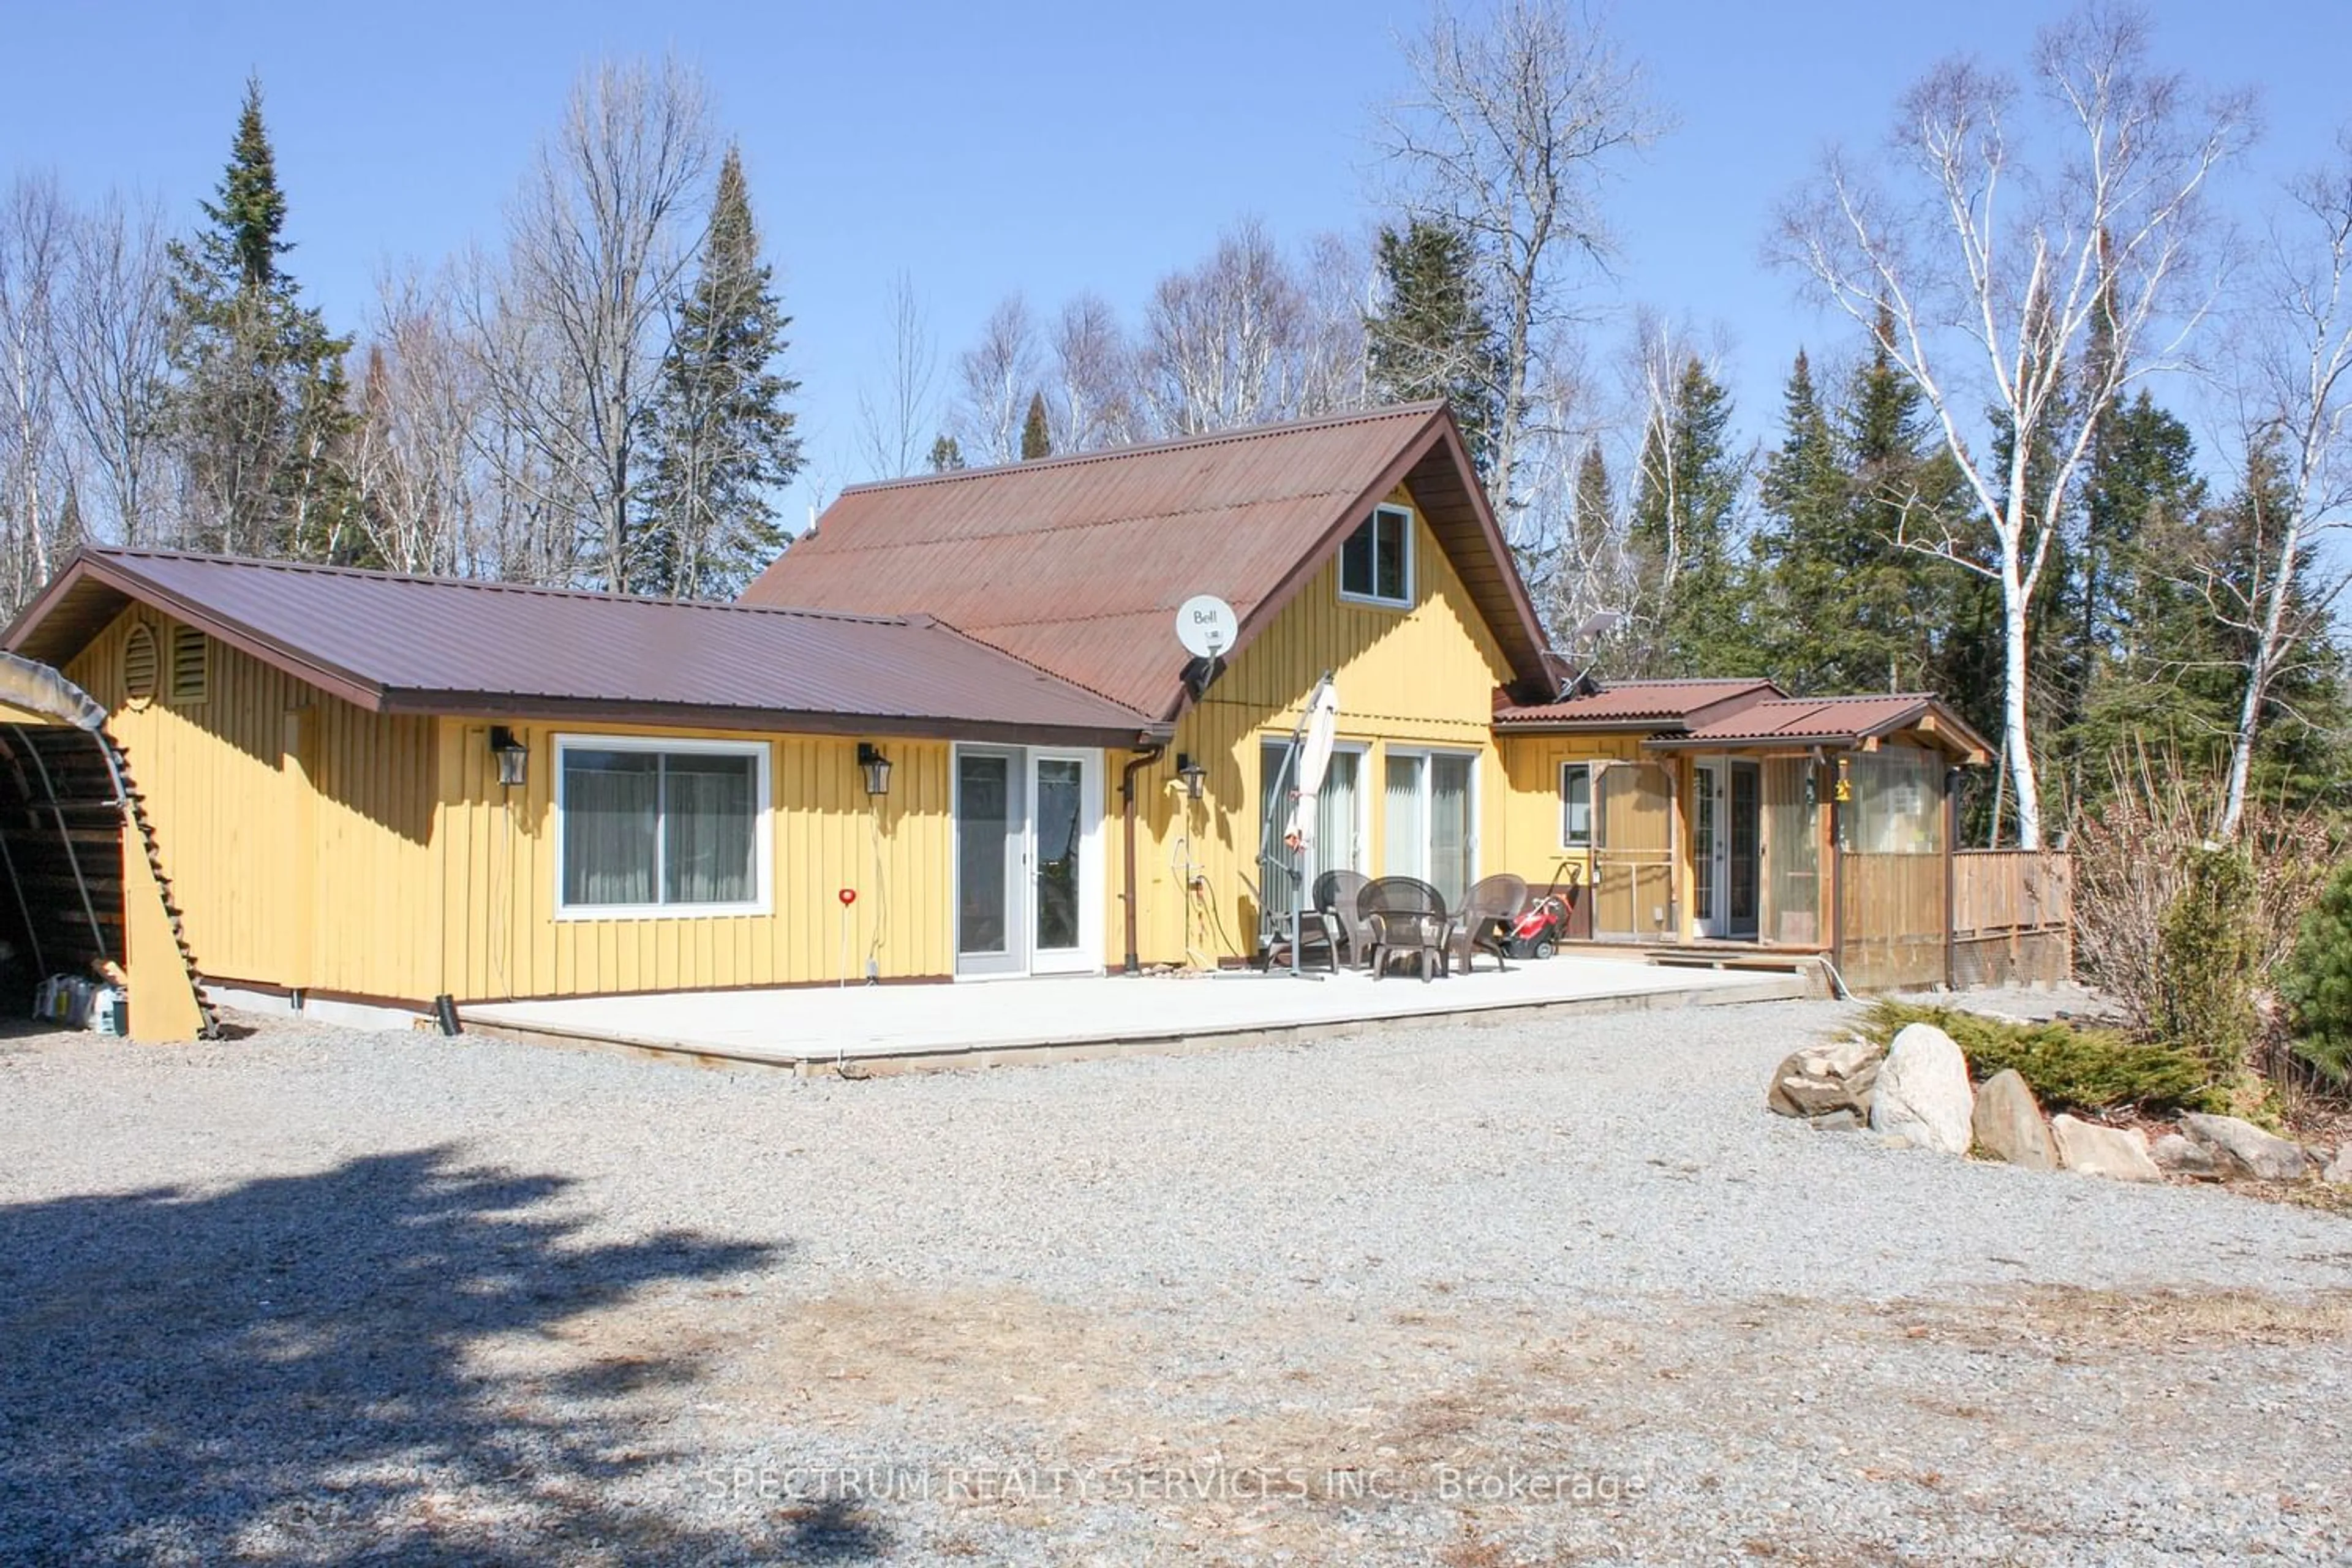 Cottage for 92 Lost Nation Rd, Brudenell, Lyndoch and Ragl Ontario K0J 2E0